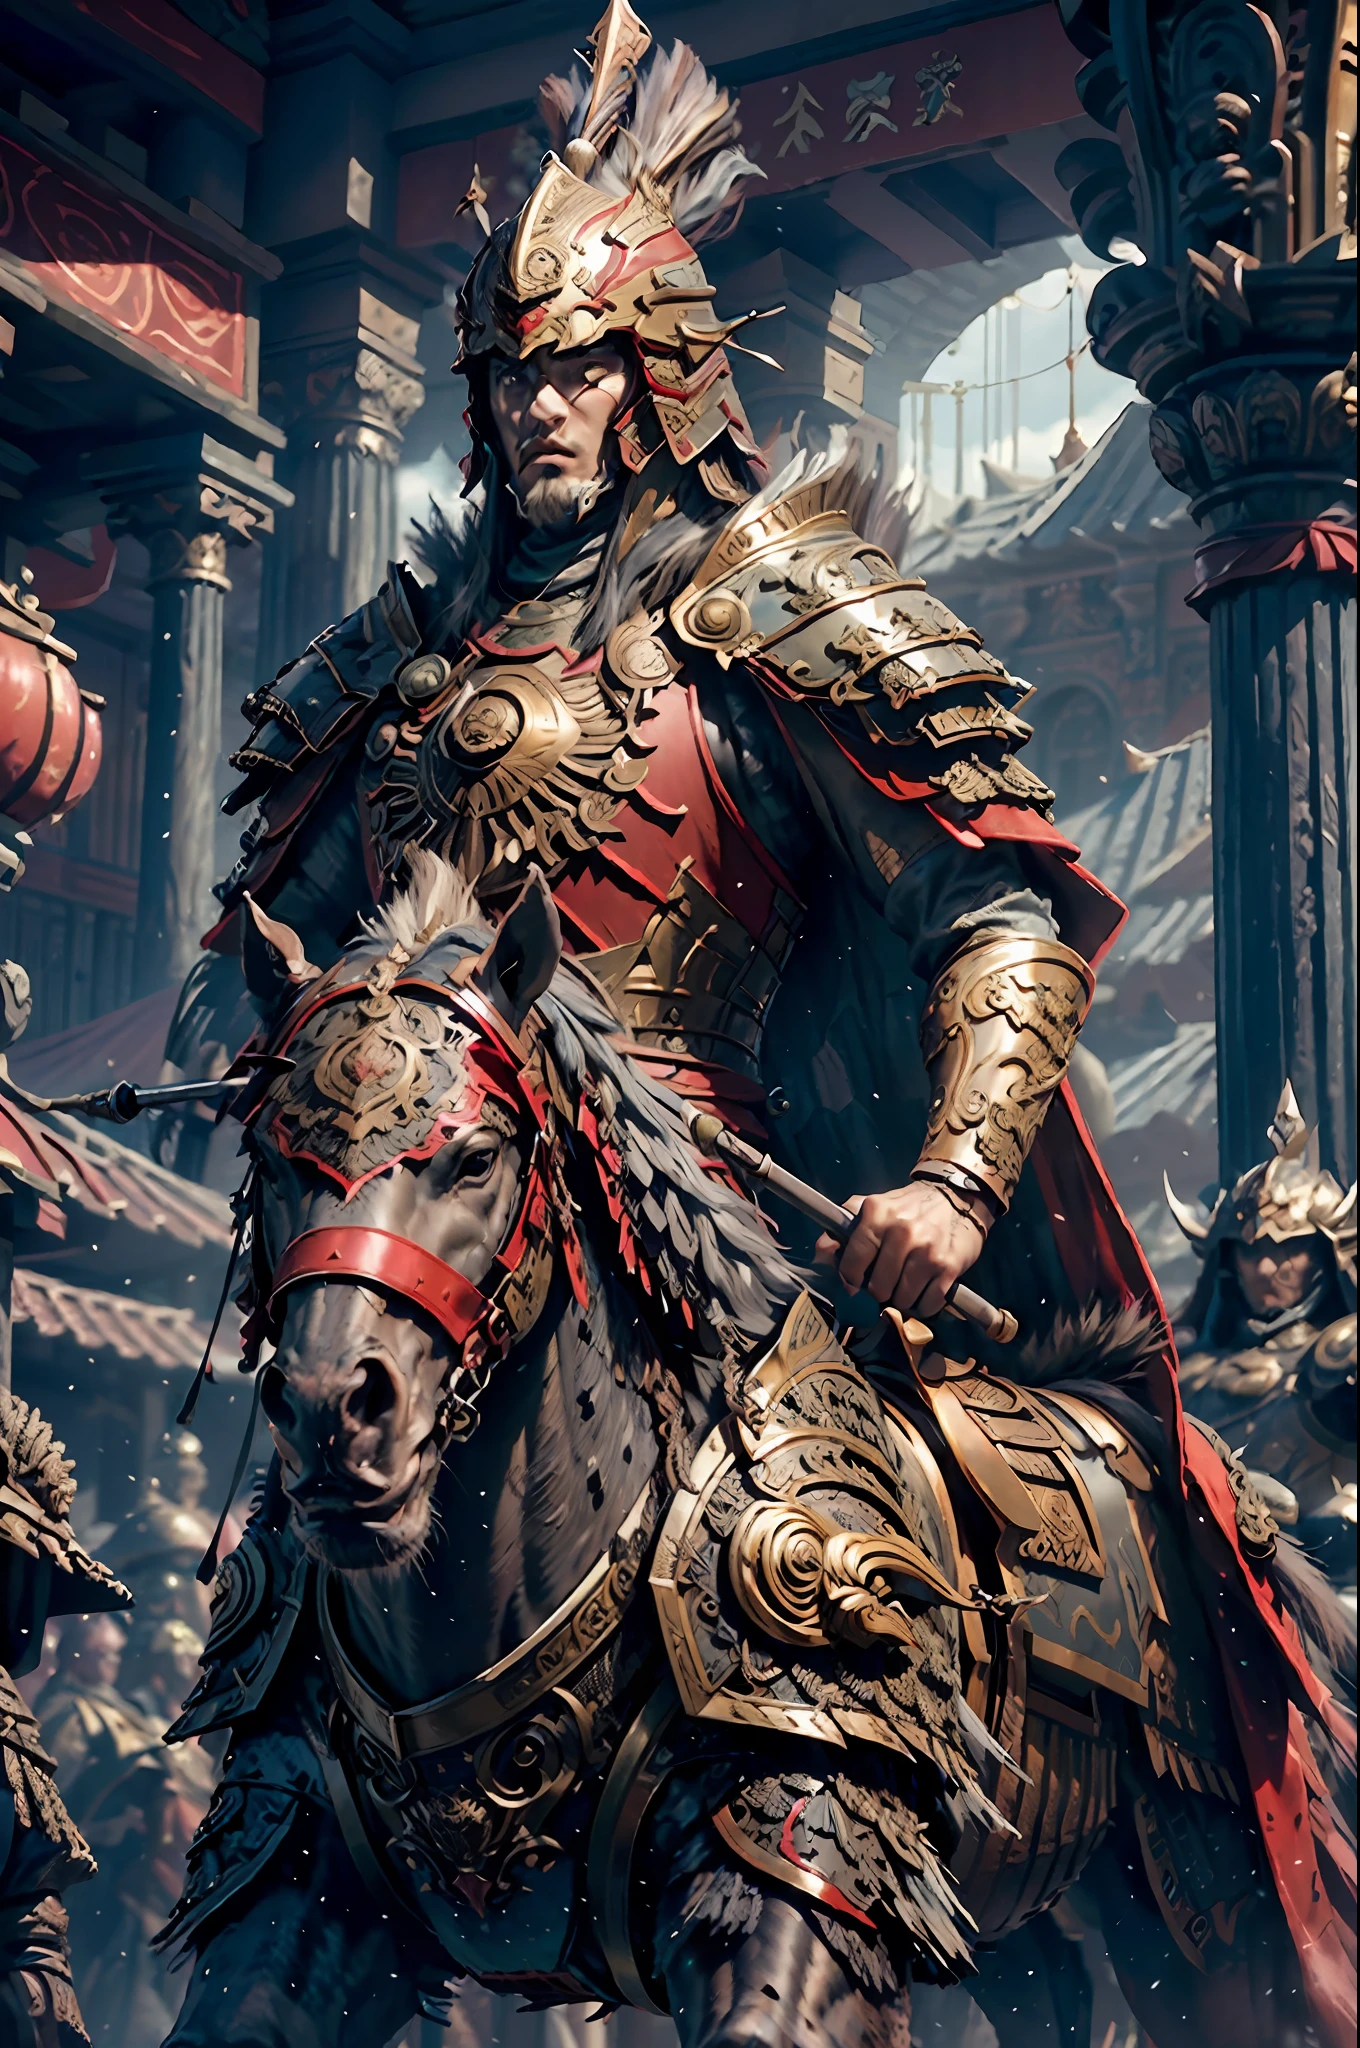 ((Masterpiece))), ((Best Quality))), ((Ultra Detailed)), (Surreal), (Highly Detailed CG Illustration), Cinematic Light, Realistic, Very Handsome Young Man, Posture, Intricate Details EABA, Red Cloak, Spear, Horse Riding, Grey Armor, Helmet